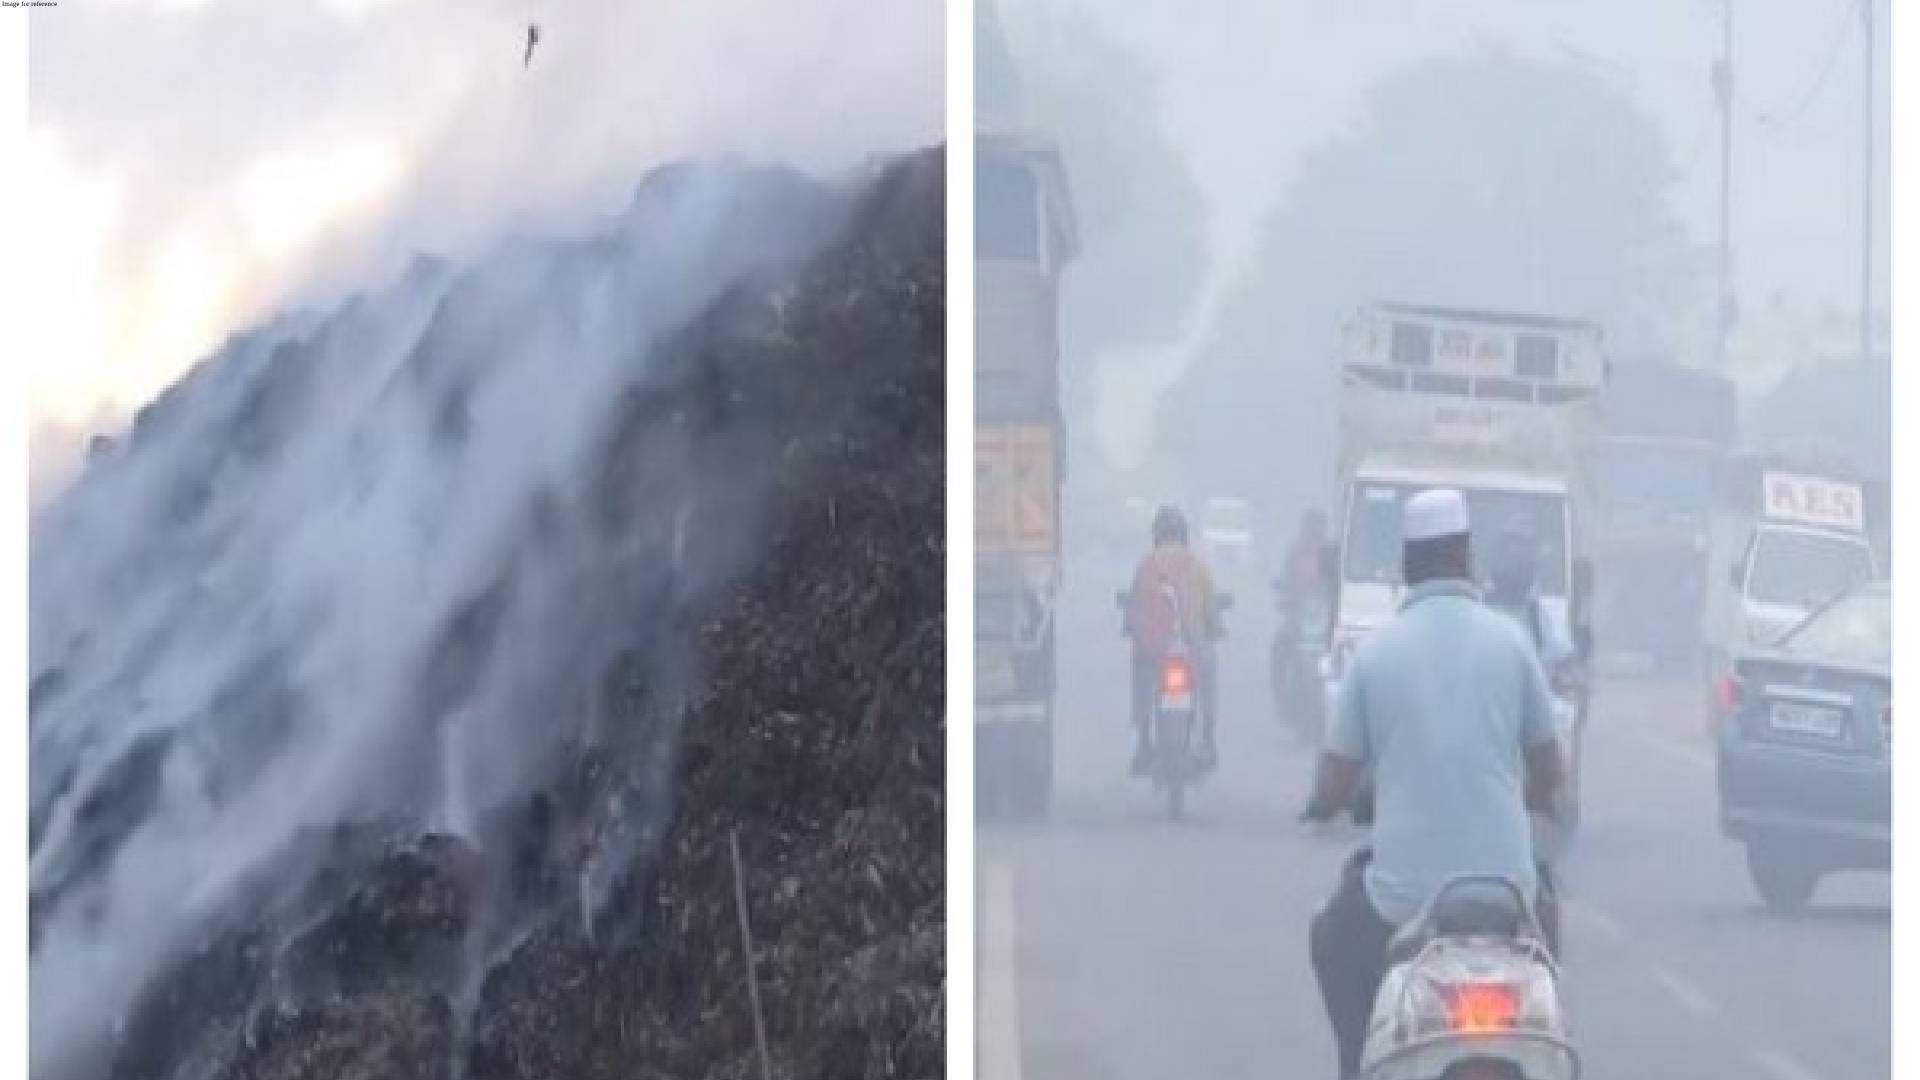 Ghazipur landfill fire: Locals grapple with breathing issues, eye and throat irritation